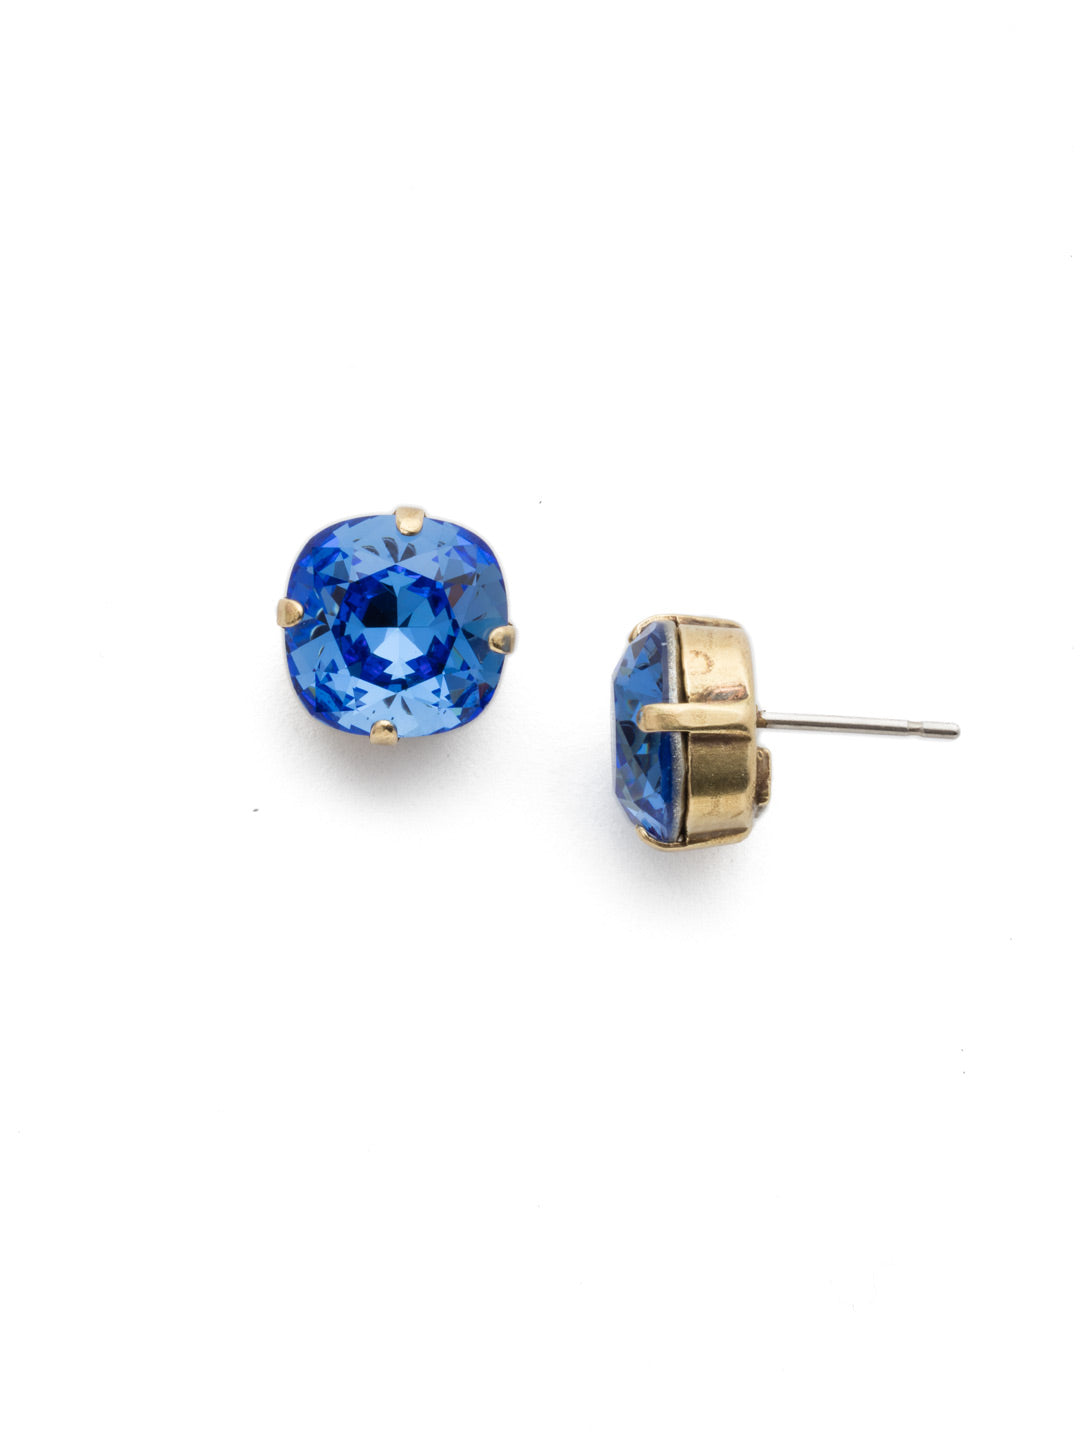 Halcyon Stud Earrings - EDH25AGSAP - <p>A beautiful, luminous cushion-cut crystal in a classic four-pronged setting that's ideal for everyday wear. From Sorrelli's Sapphire collection in our Antique Gold-tone finish.</p>